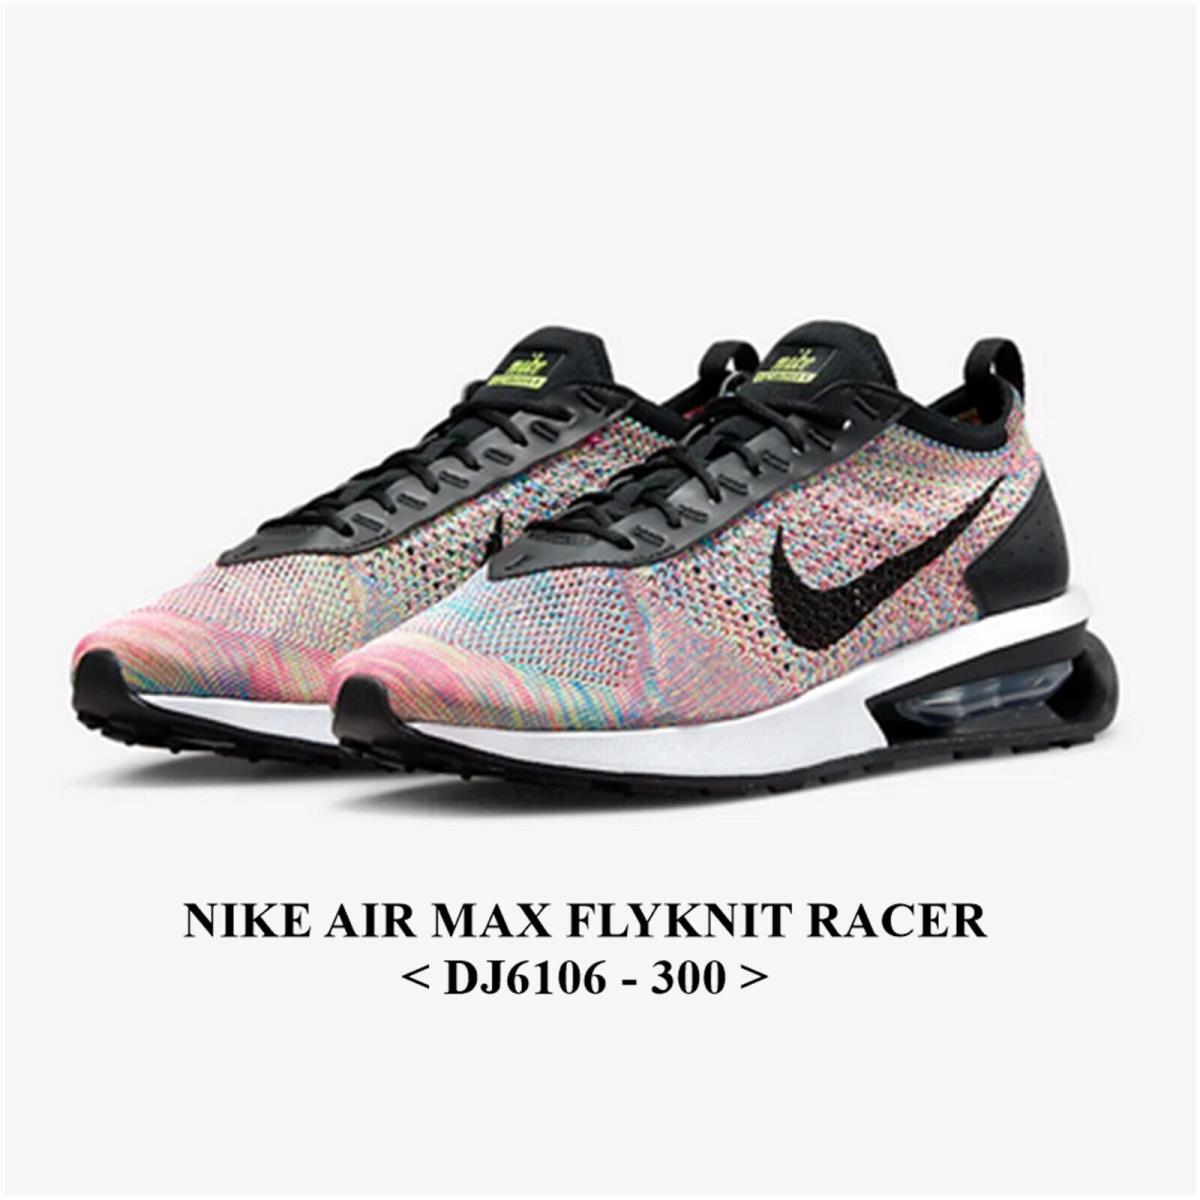 Nike Air Max Flyknit Racer CJ6106-300 .unisex Adult Athletic Shoes NO Lid